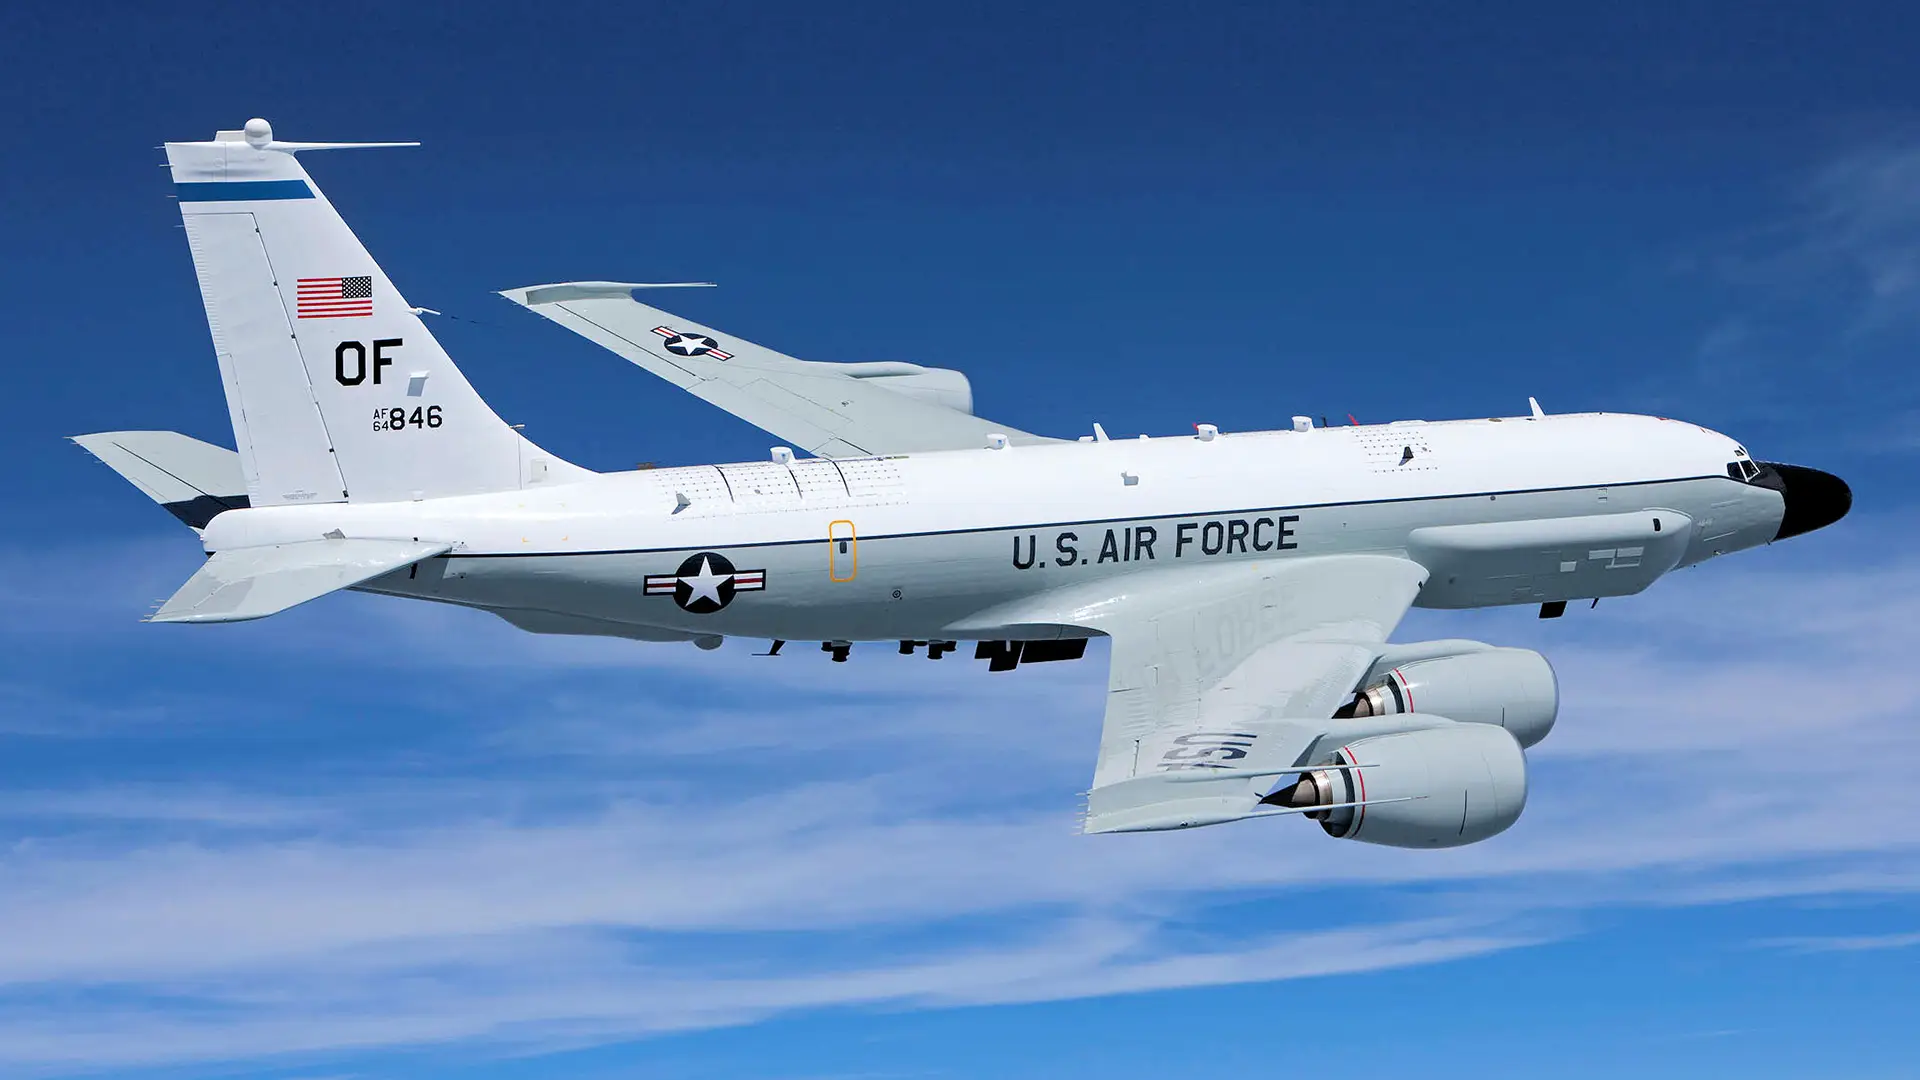 RC-135V/W Rivet Joint performs an unprecedented mission in Europe - a US strategic aircraft flies along the Finnish-Russian border